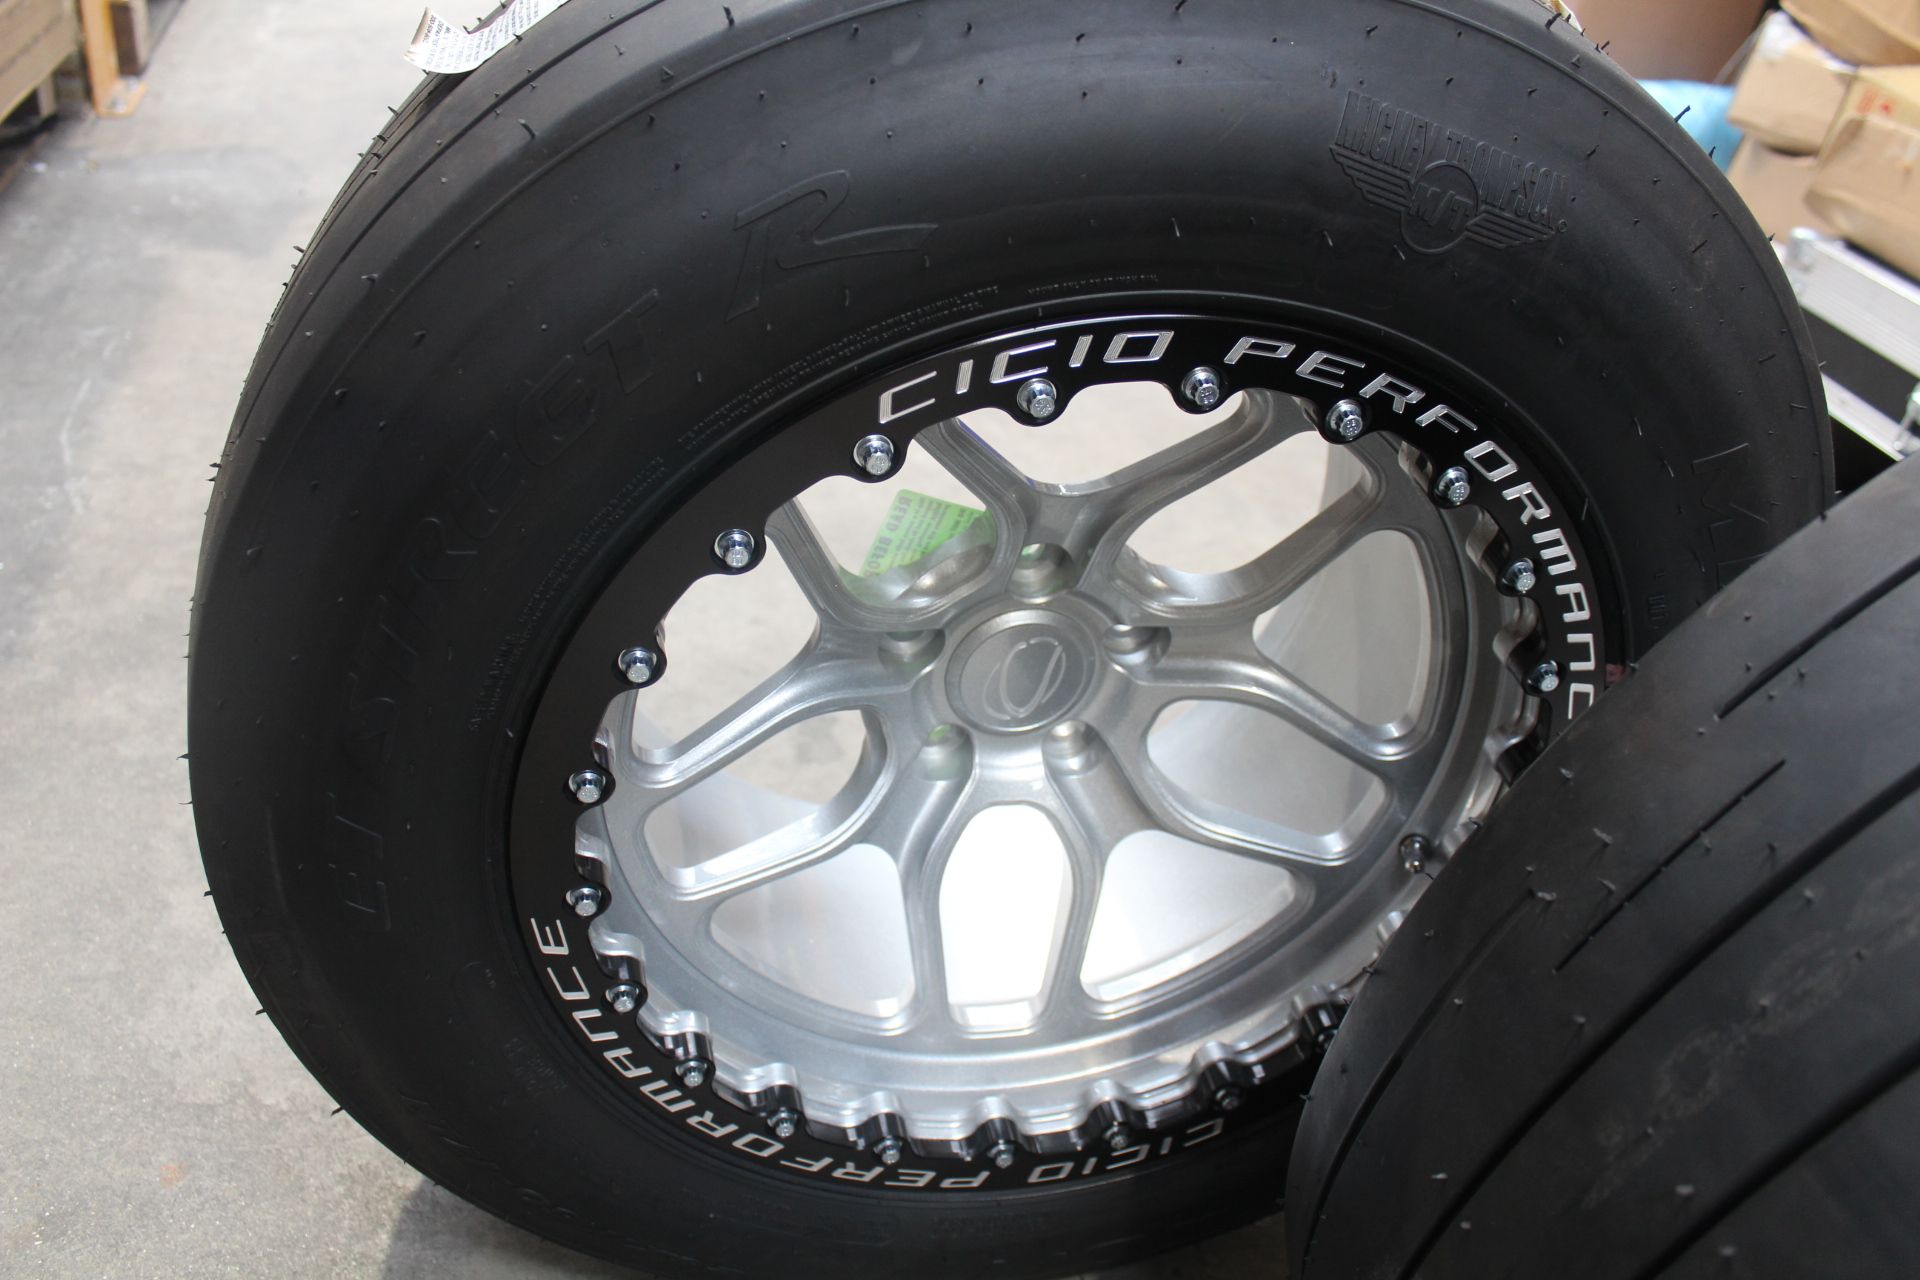 Two Cicio Performance Drag Wheels for a Nissan R35 GTR with Mickey Thompson E.T Street R Tyres. - Image 7 of 7